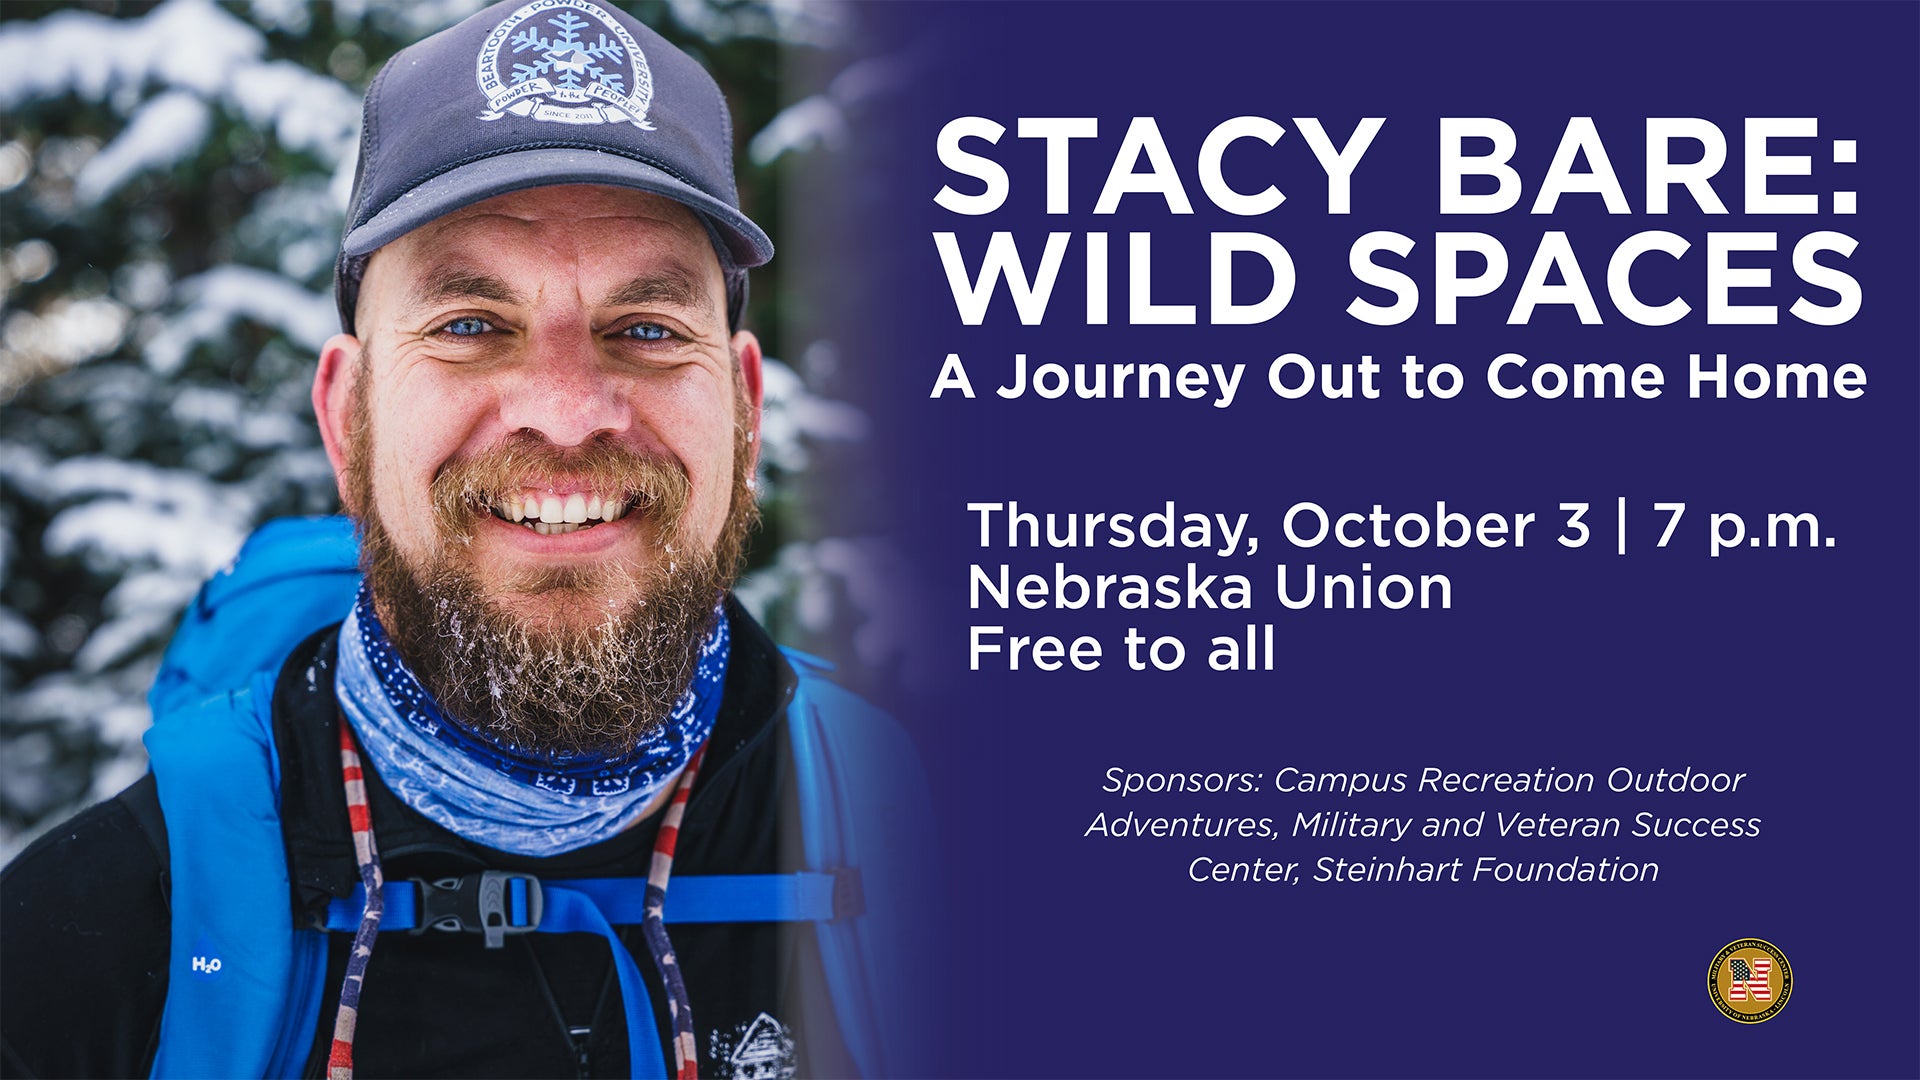 Stacy Bare: Wild Spaces